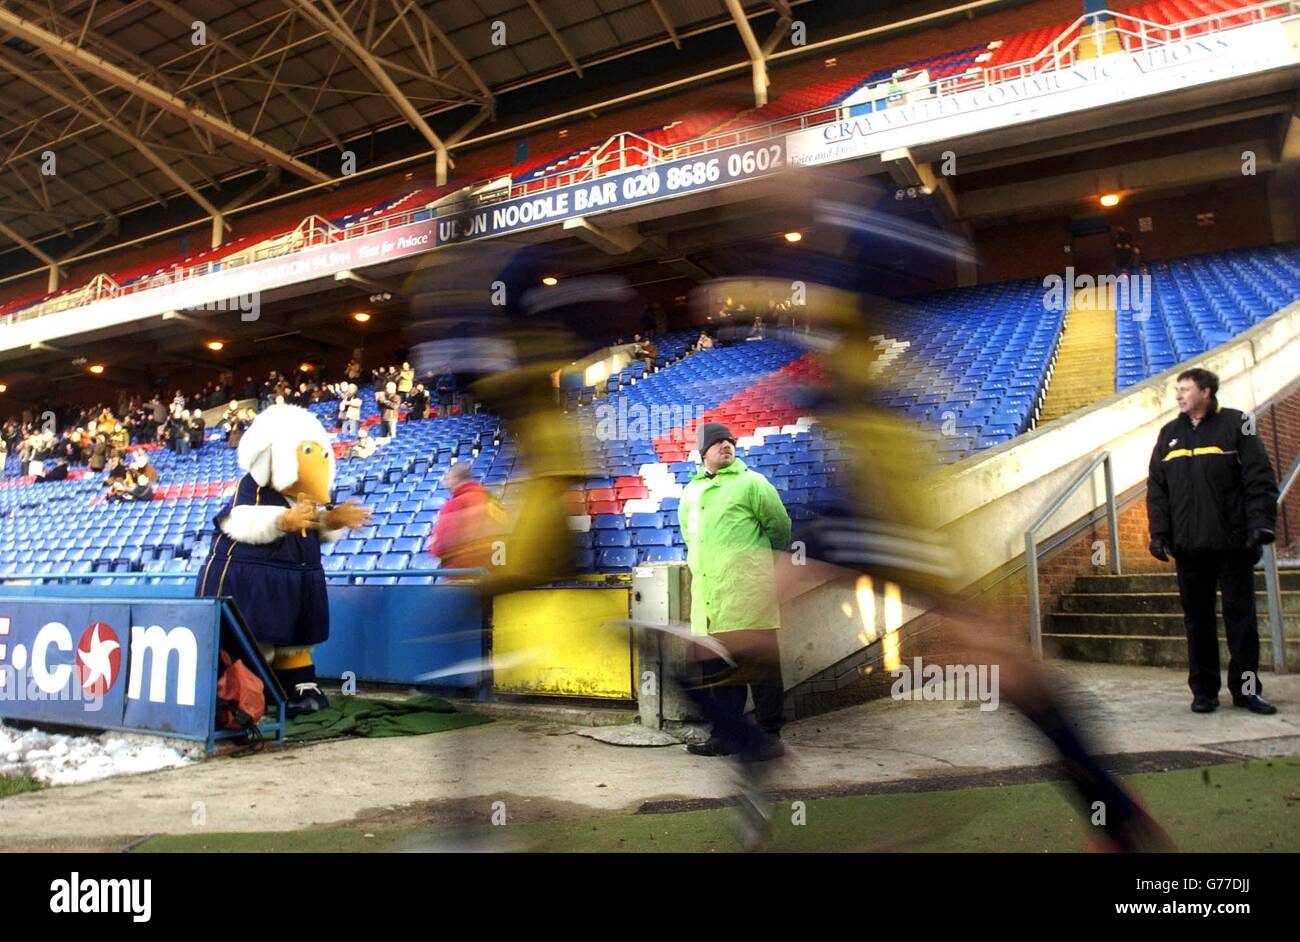 The ghosted figures of two Wimbledon players run out on to the pitch in front of a near empty stand, during the Nationwide Division One match between Wimbledon and Grimsby at Wimbledon's Selhurst Park ground in London. NO UNOFFICIAL CLUB WEBSITE USE. Stock Photo